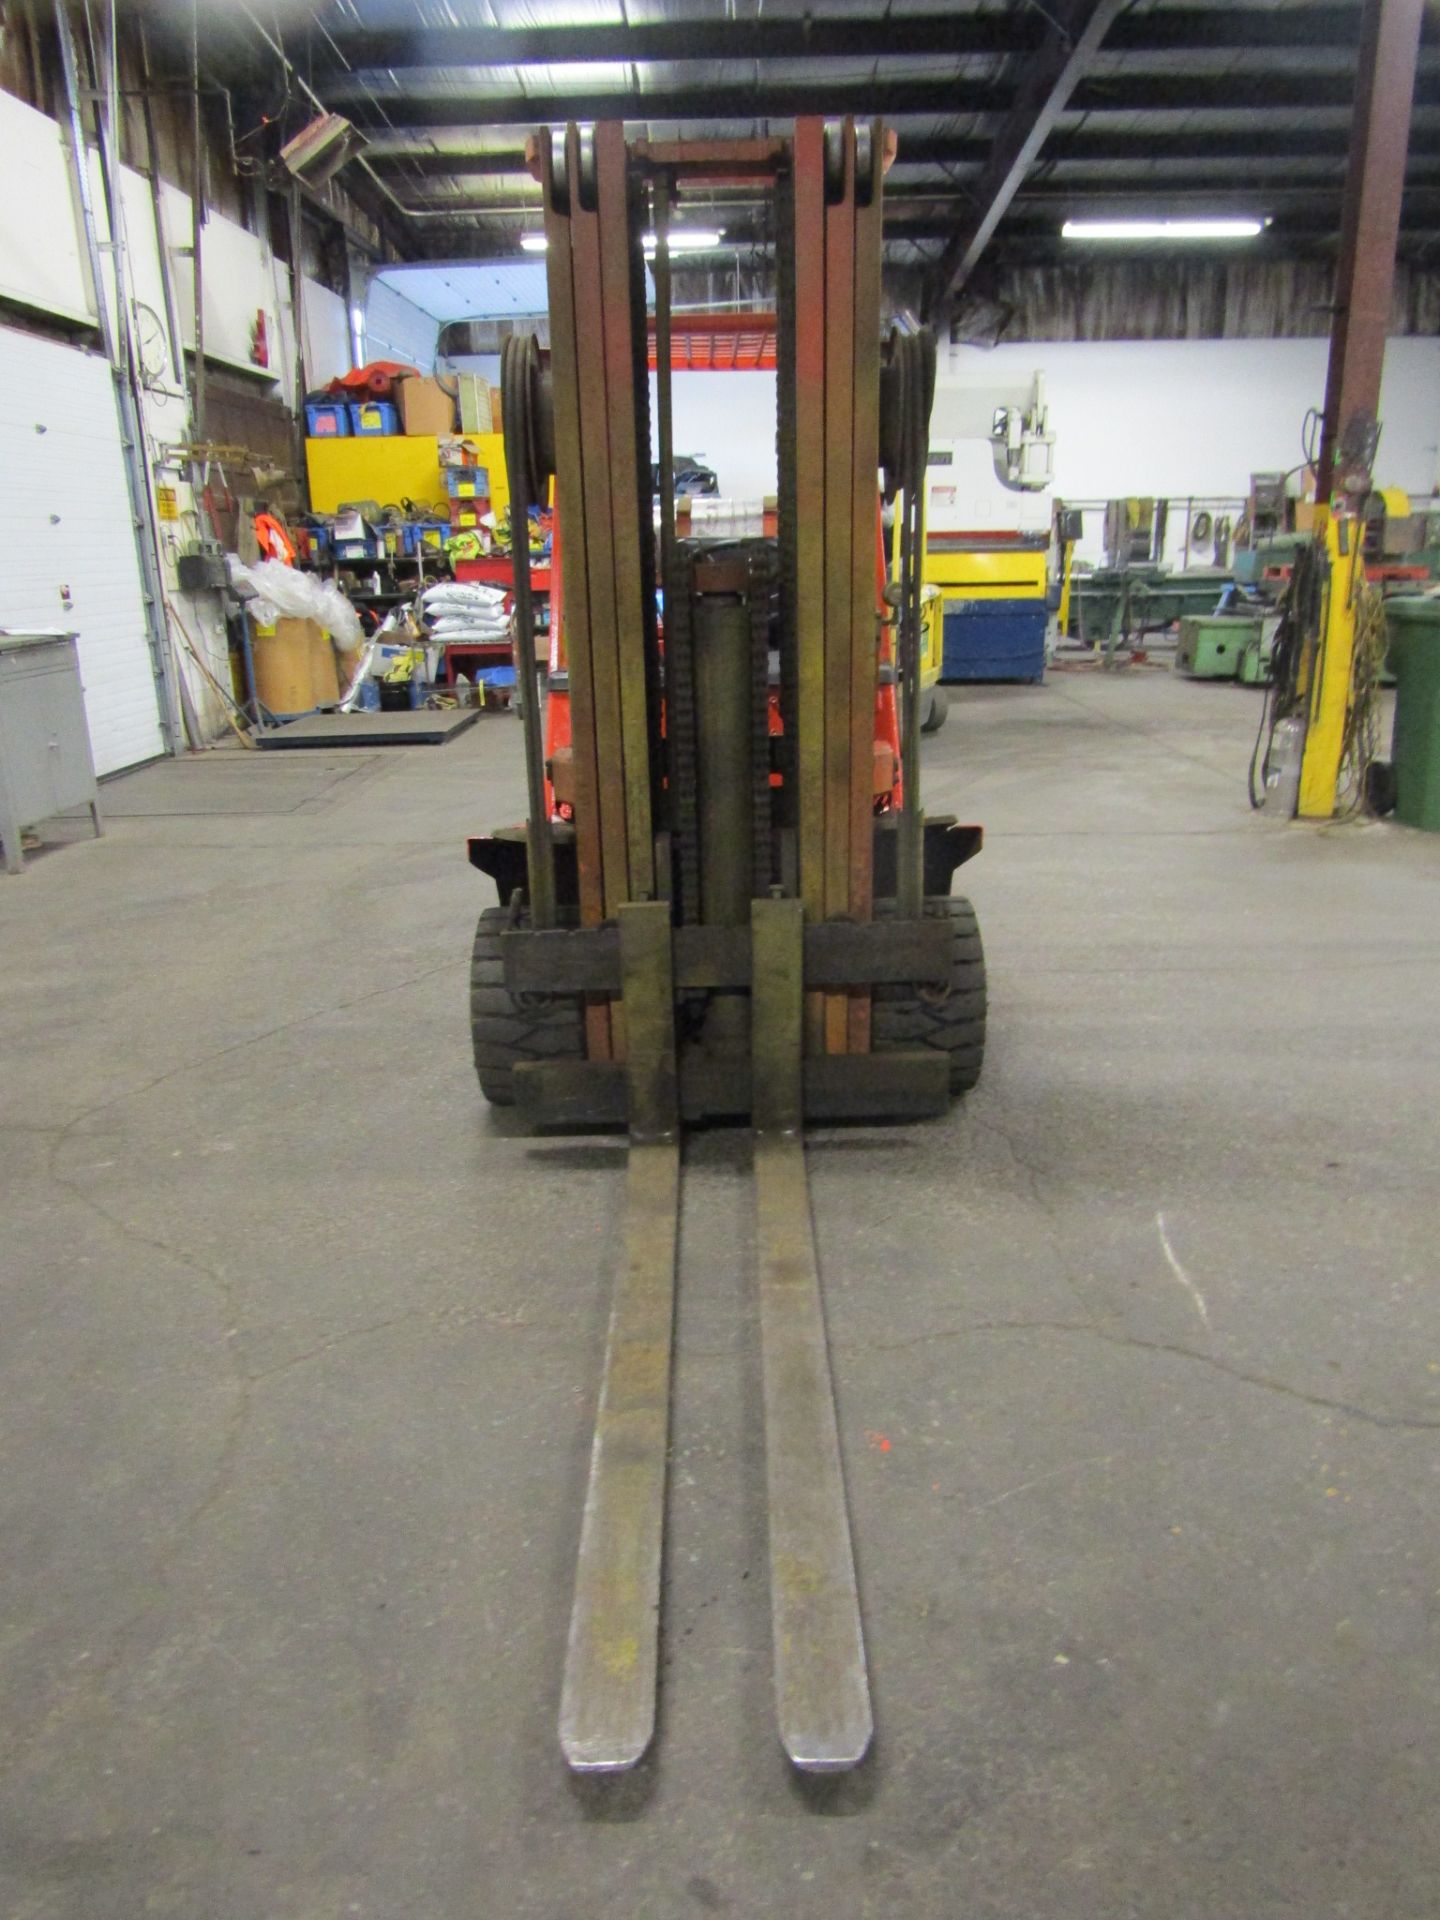 Toyota 10000lbs Capacity Forklift - LPG (propane) with 6' forks with 3-stage mast (no propane tank - Image 2 of 3